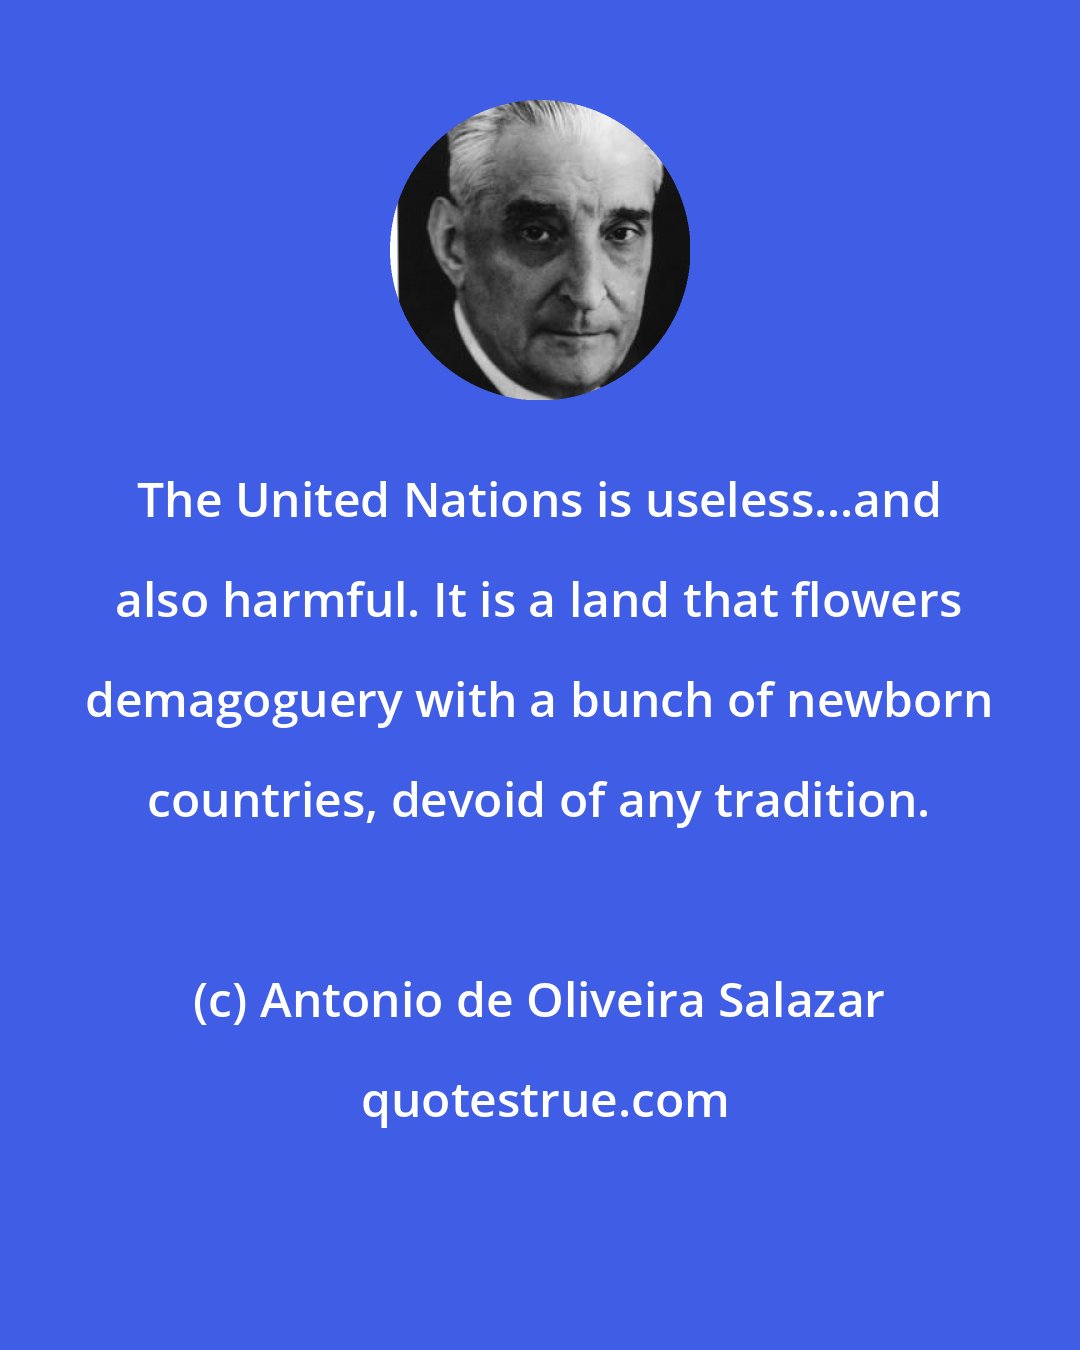 Antonio de Oliveira Salazar: The United Nations is useless...and also harmful. It is a land that flowers demagoguery with a bunch of newborn countries, devoid of any tradition.